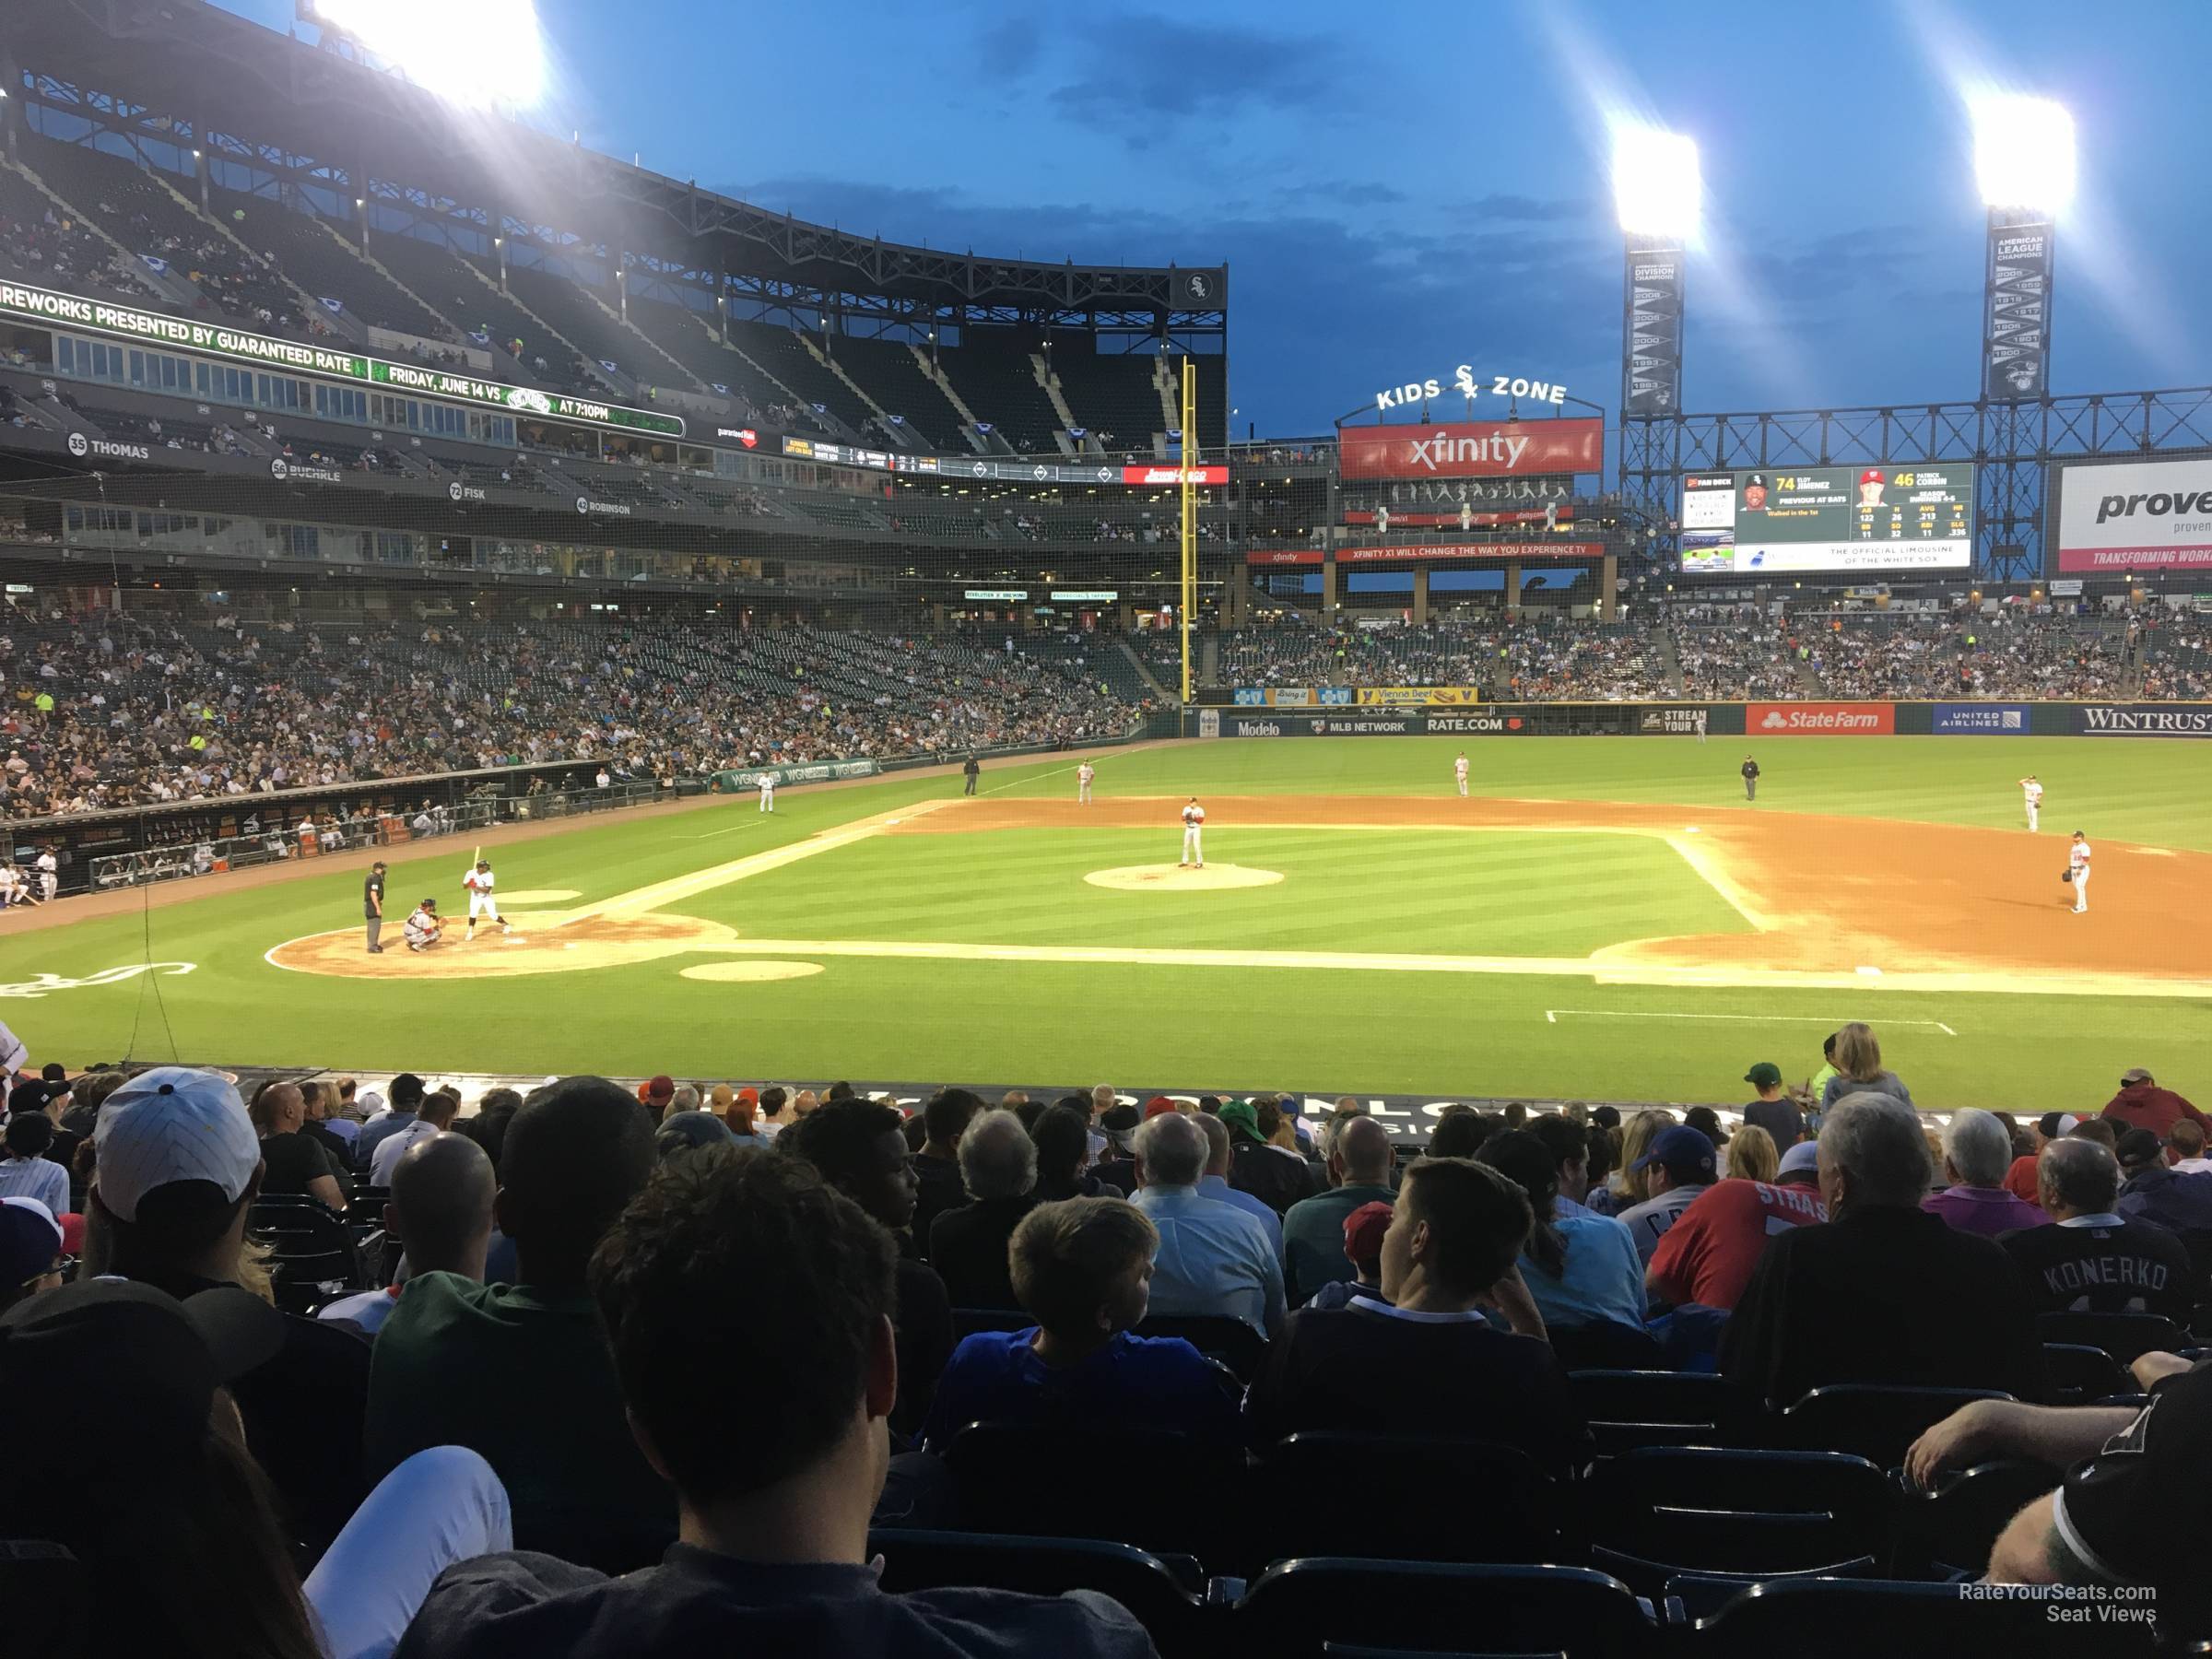 section 125, row 24 seat view  - guaranteed rate field